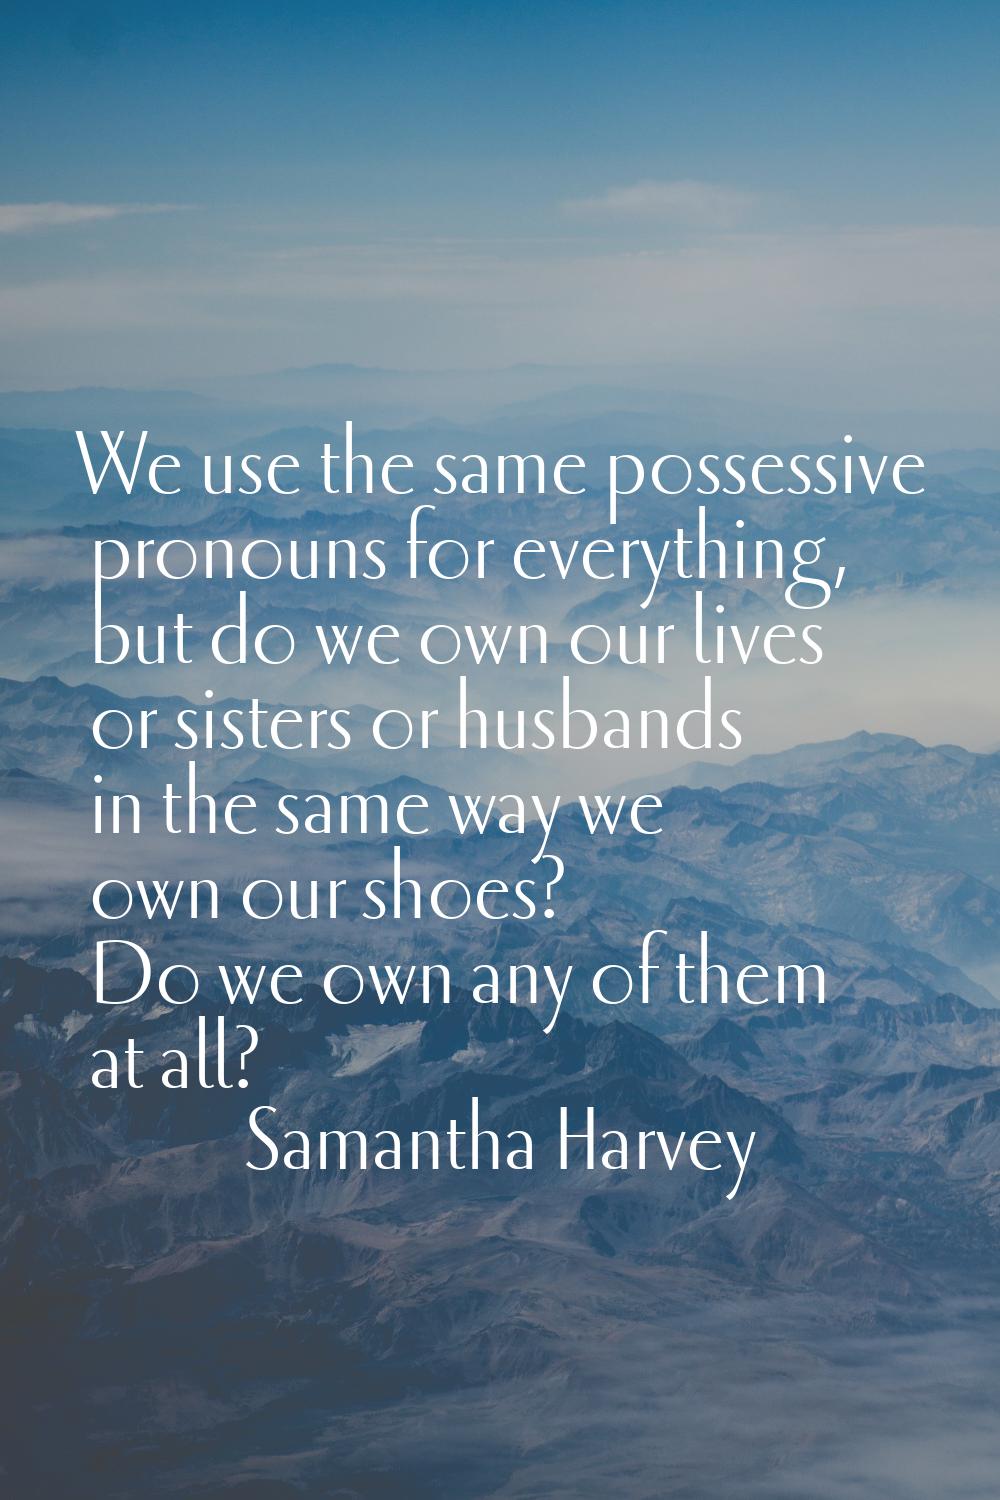 We use the same possessive pronouns for everything, but do we own our lives or sisters or husbands 